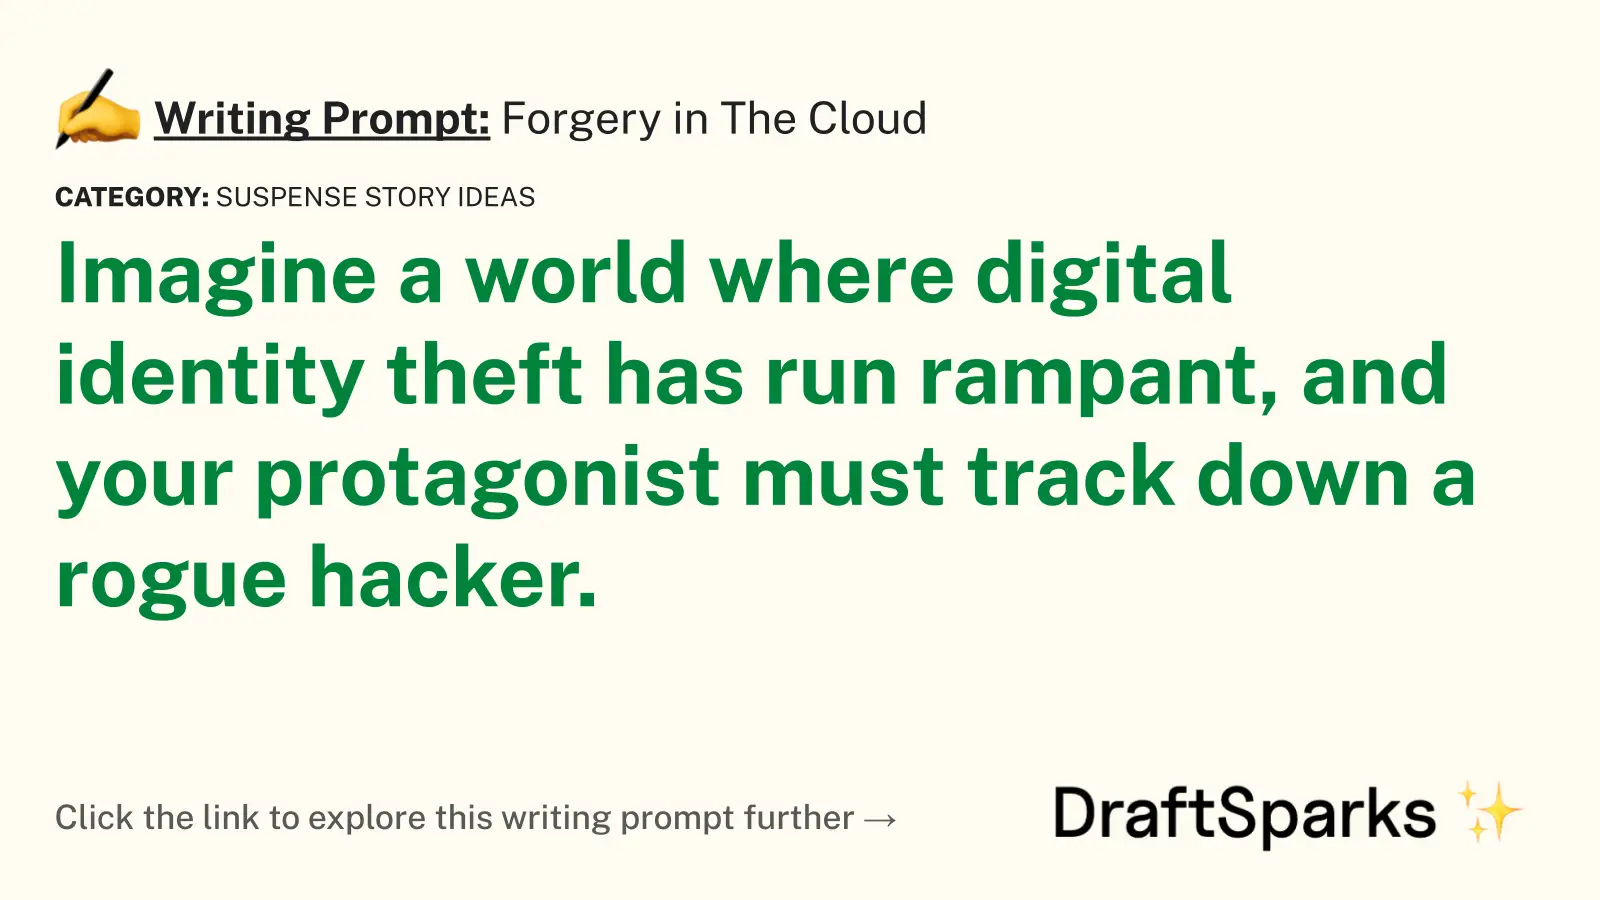 Forgery in The Cloud